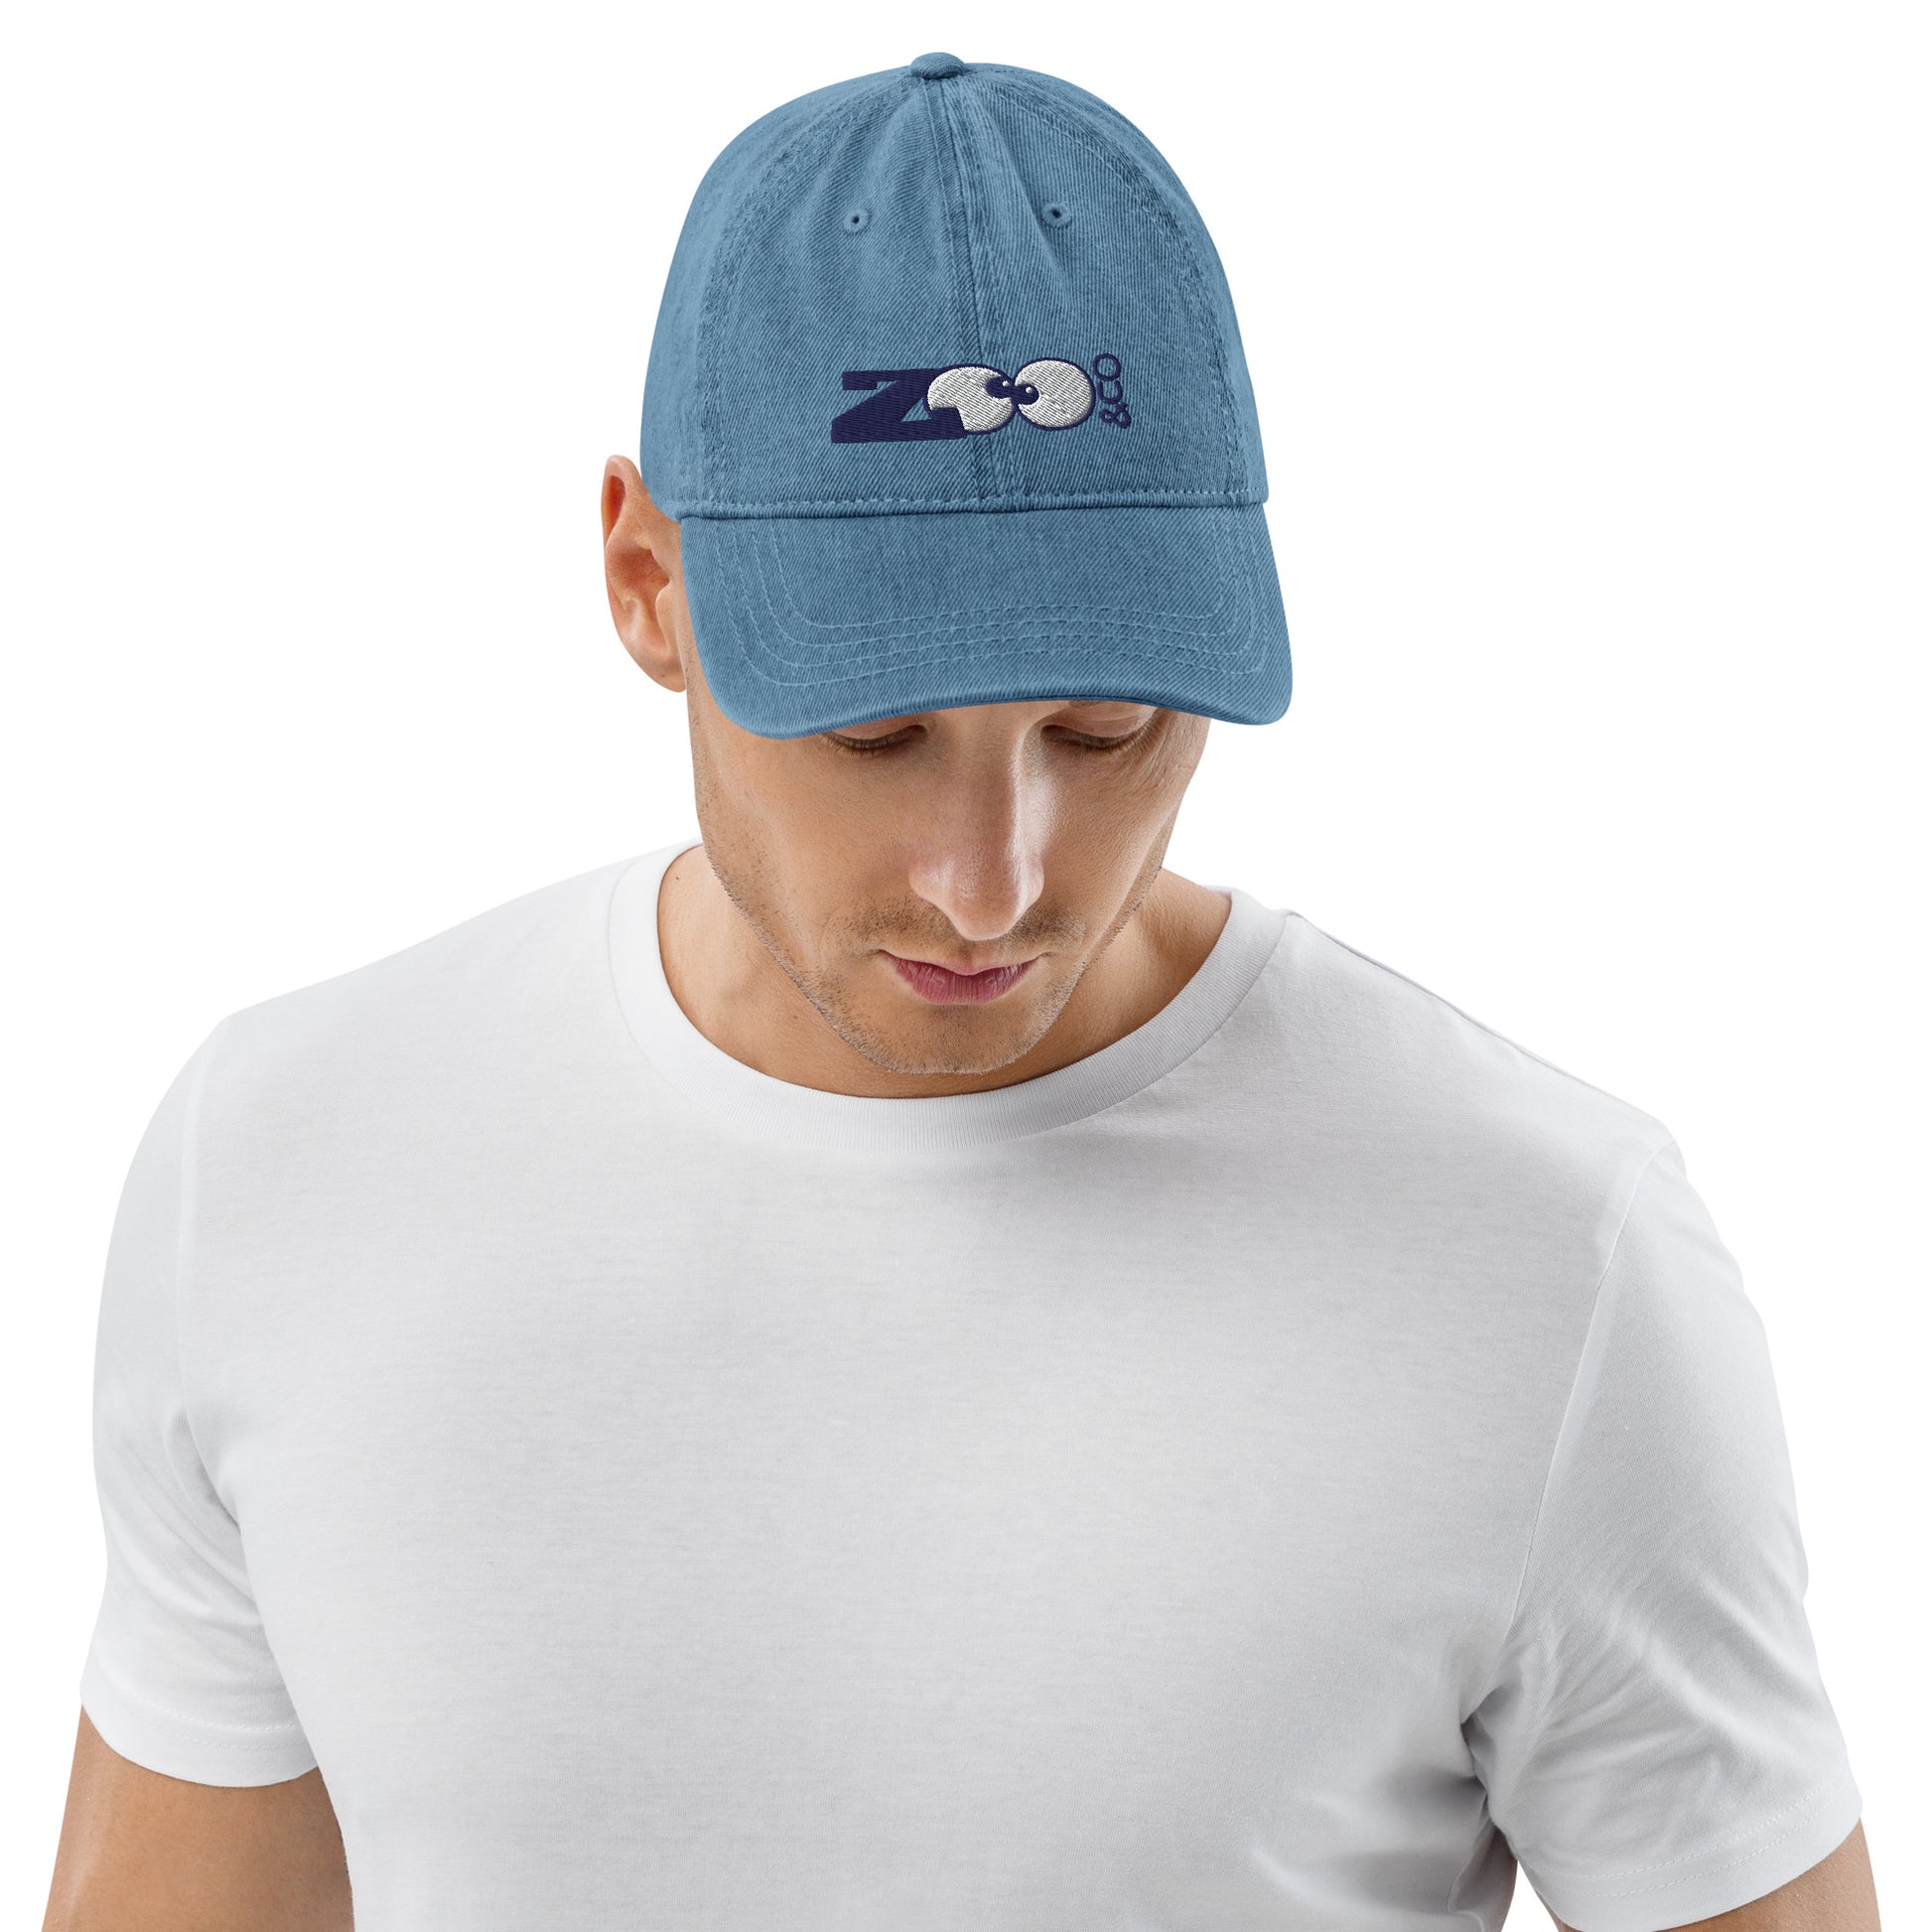 Young man wearing Blue Denim Hat embroidered with Zoo&co's logo